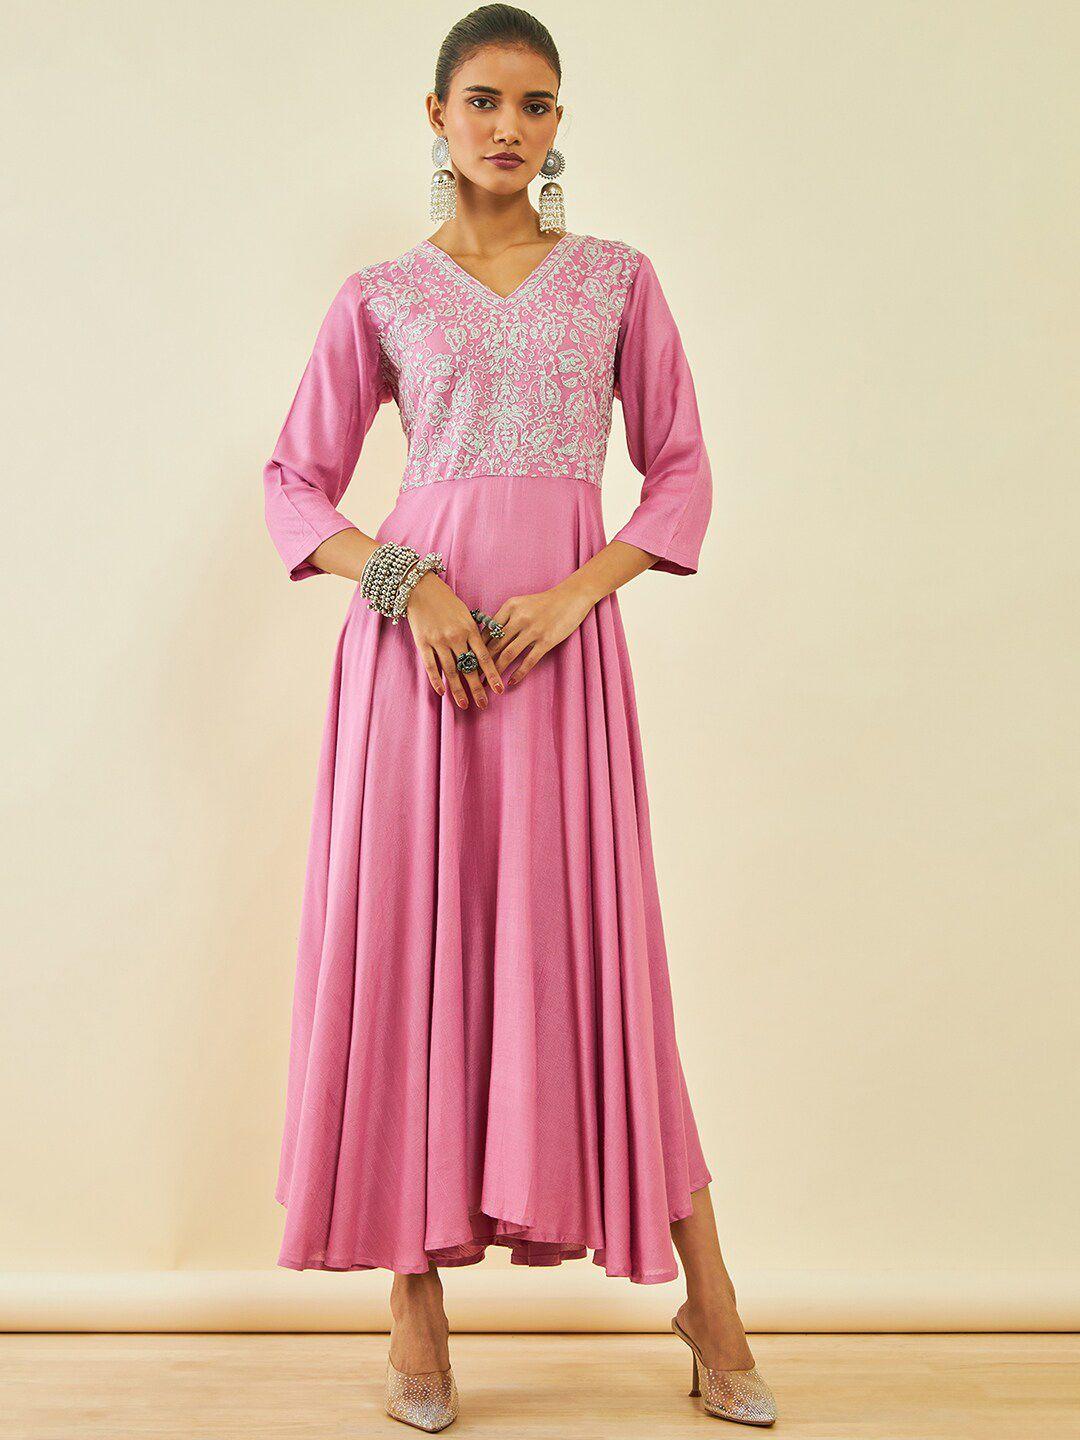 soch floral embroidered ethnic dress